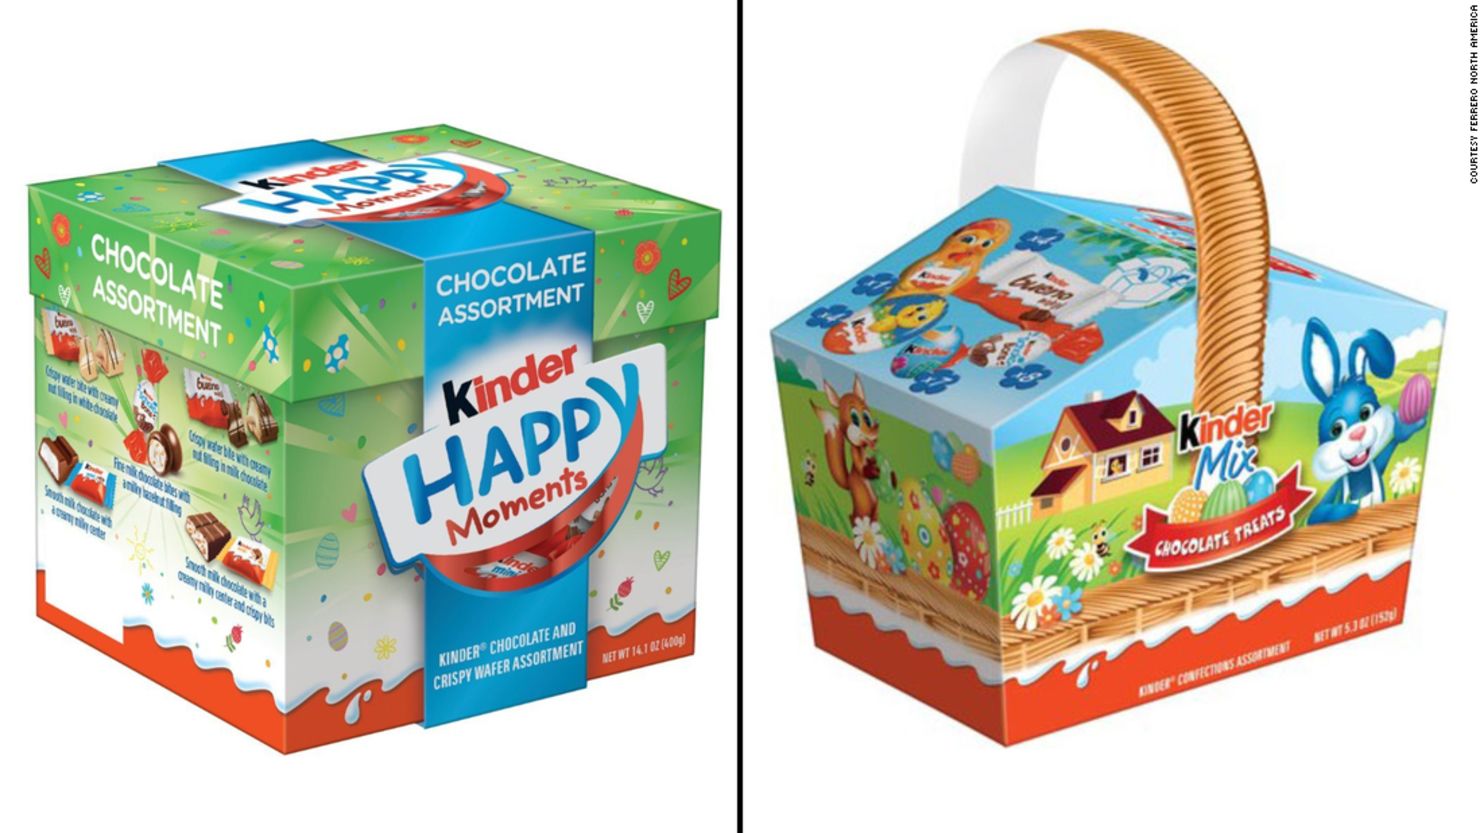 Ferrero recalls some Kinder chocolates from US over salmonella fears